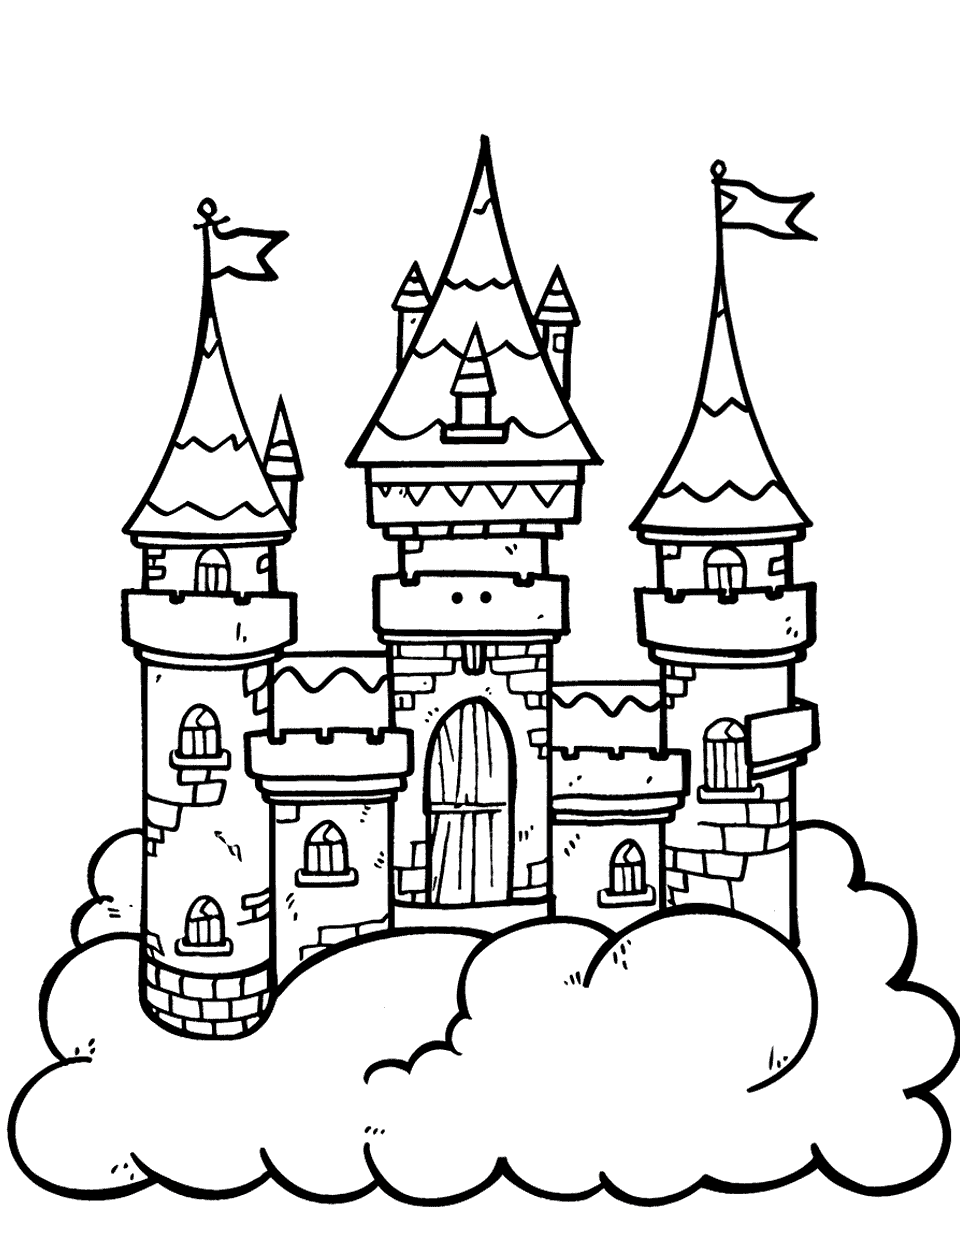 Castle on a Cloud Coloring Page - A whimsical scene with a castle sitting atop a fluffy cloud.